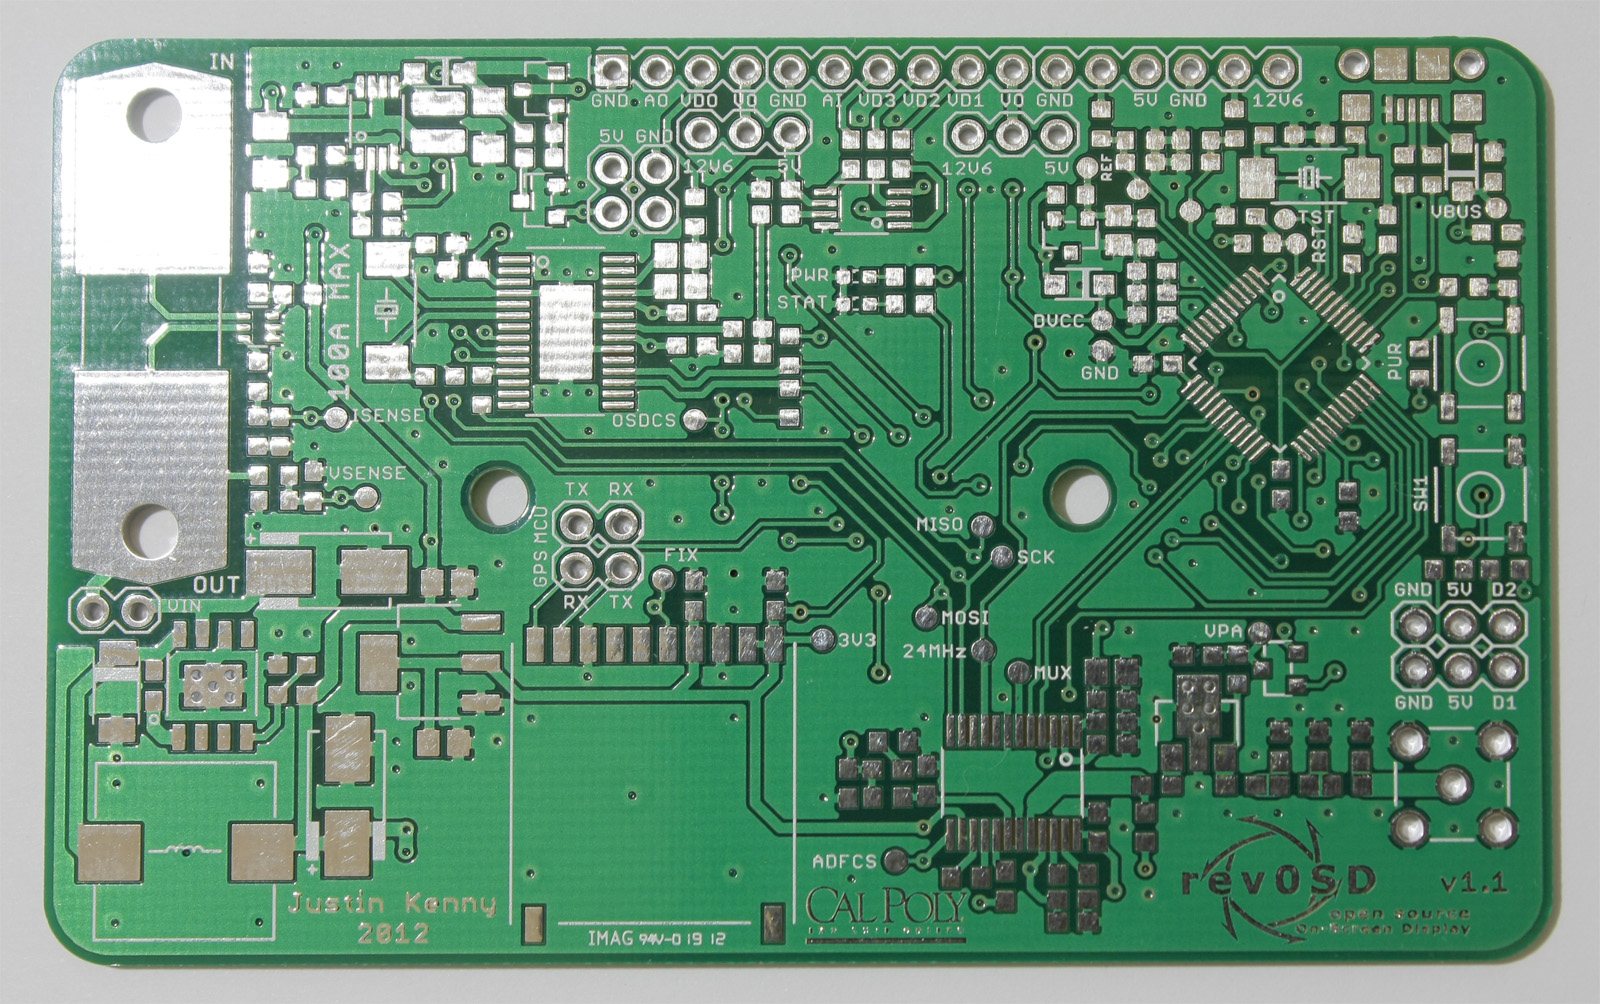 Top of the rev0SD PCB